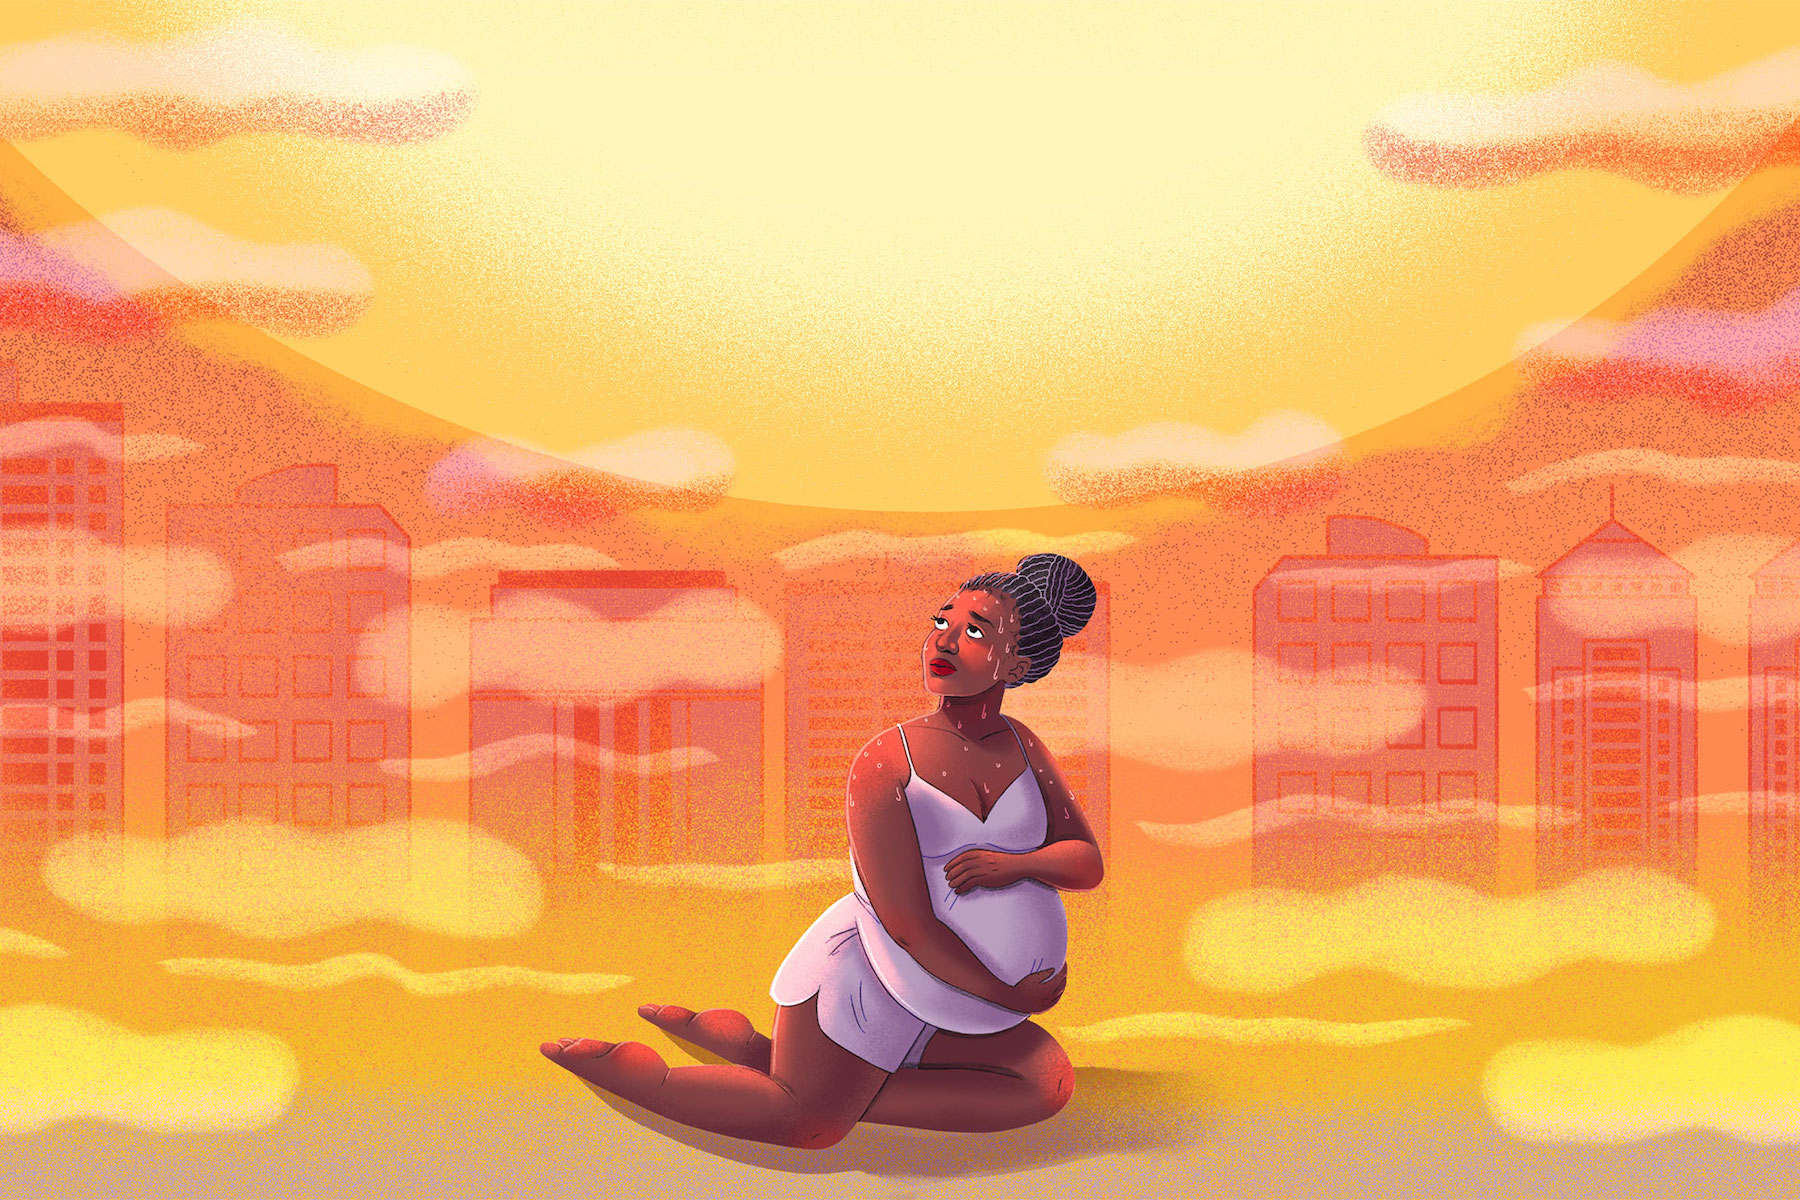 An illustration of a pregnant woman battling extreme sun and heat in a city.